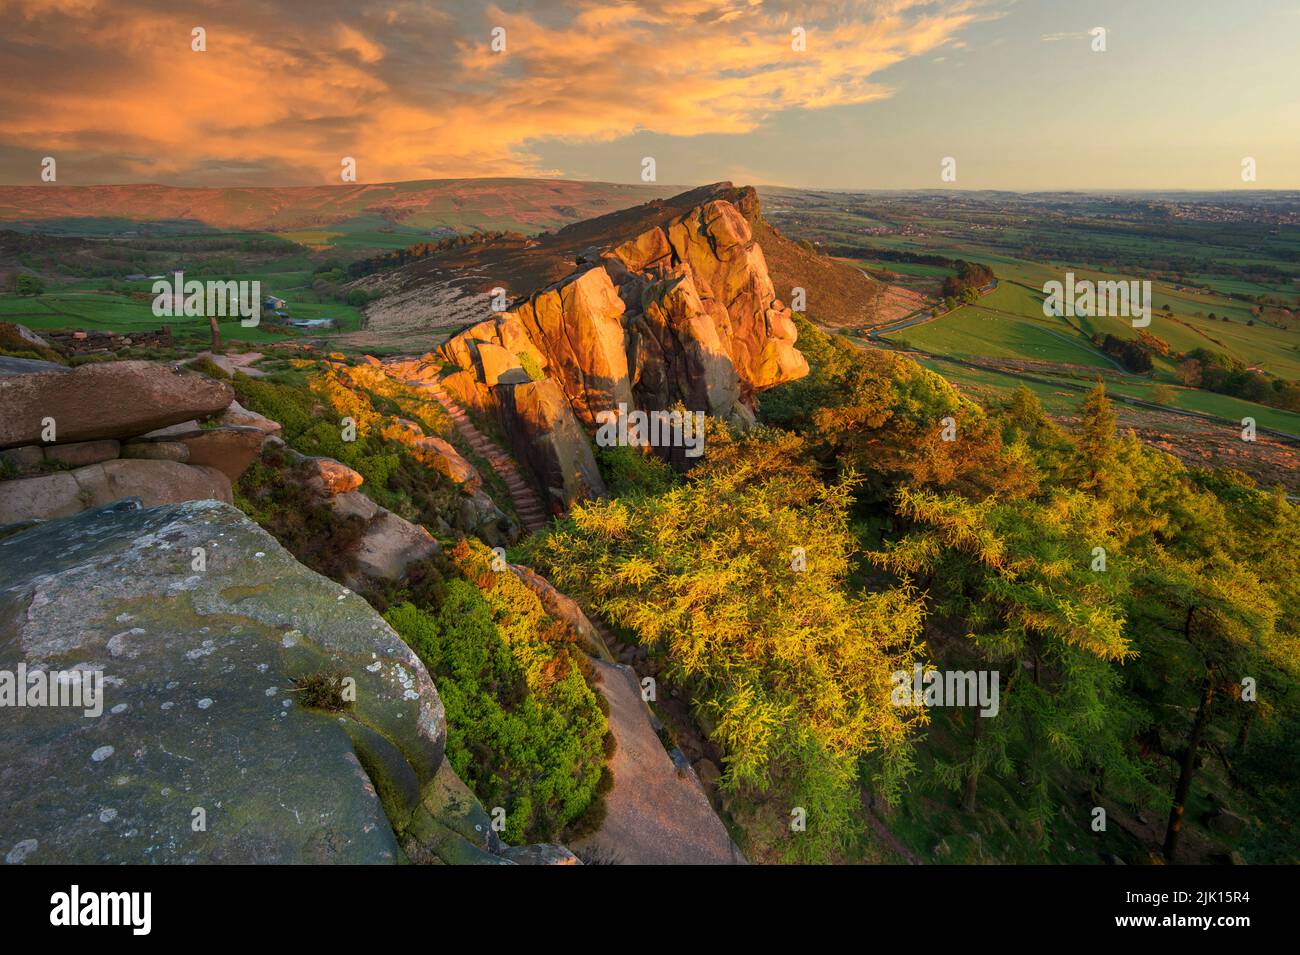 A sunset view of Hen Cloud, The Roaches, Peak District, Staffordshire, England, United Kingdom, Europe Stock Photo